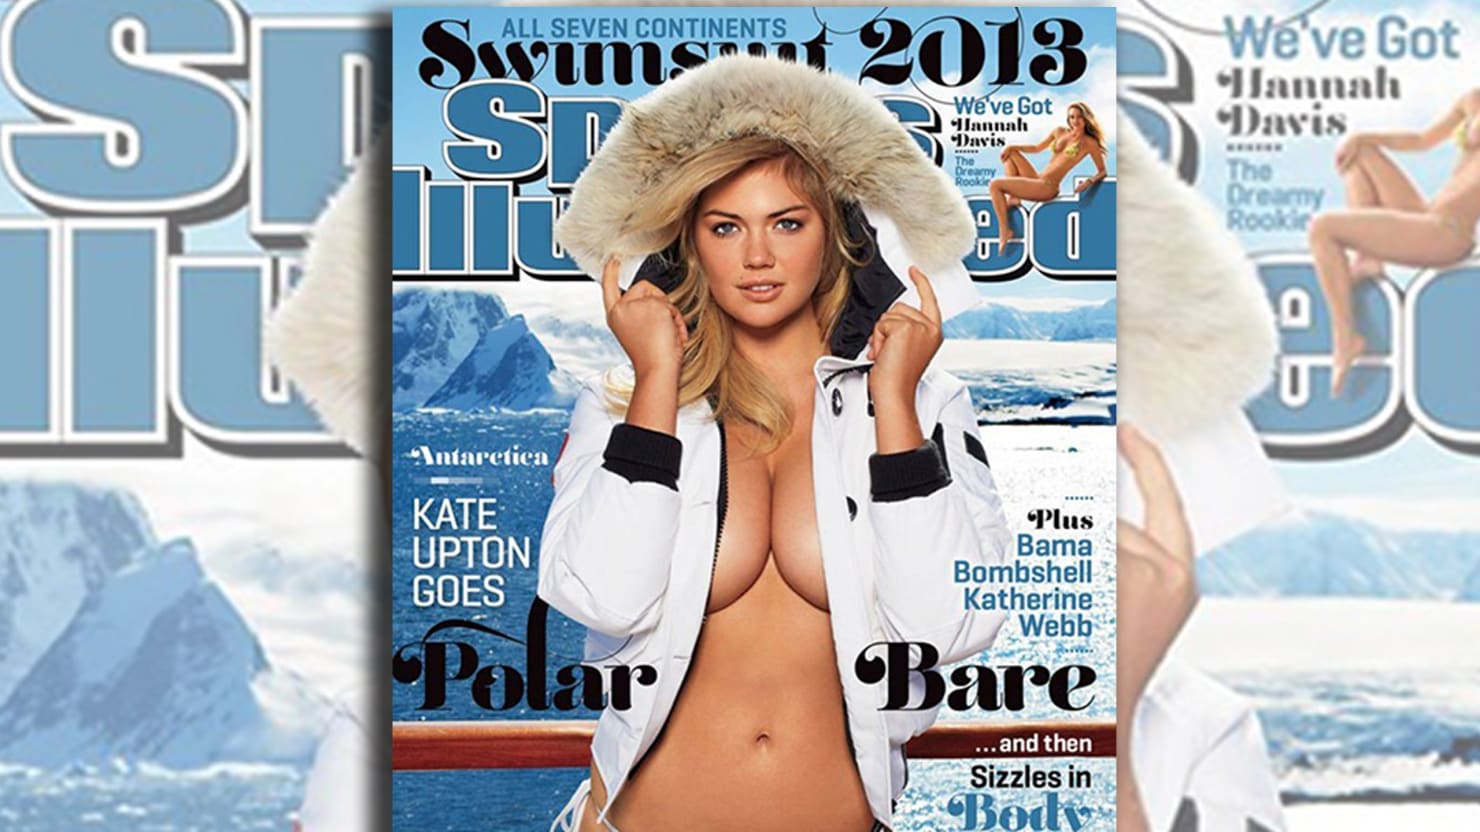 Kate Upton Porn Dog - Kate Upton's Second SI Cover, Porn Appears at Fashion Week